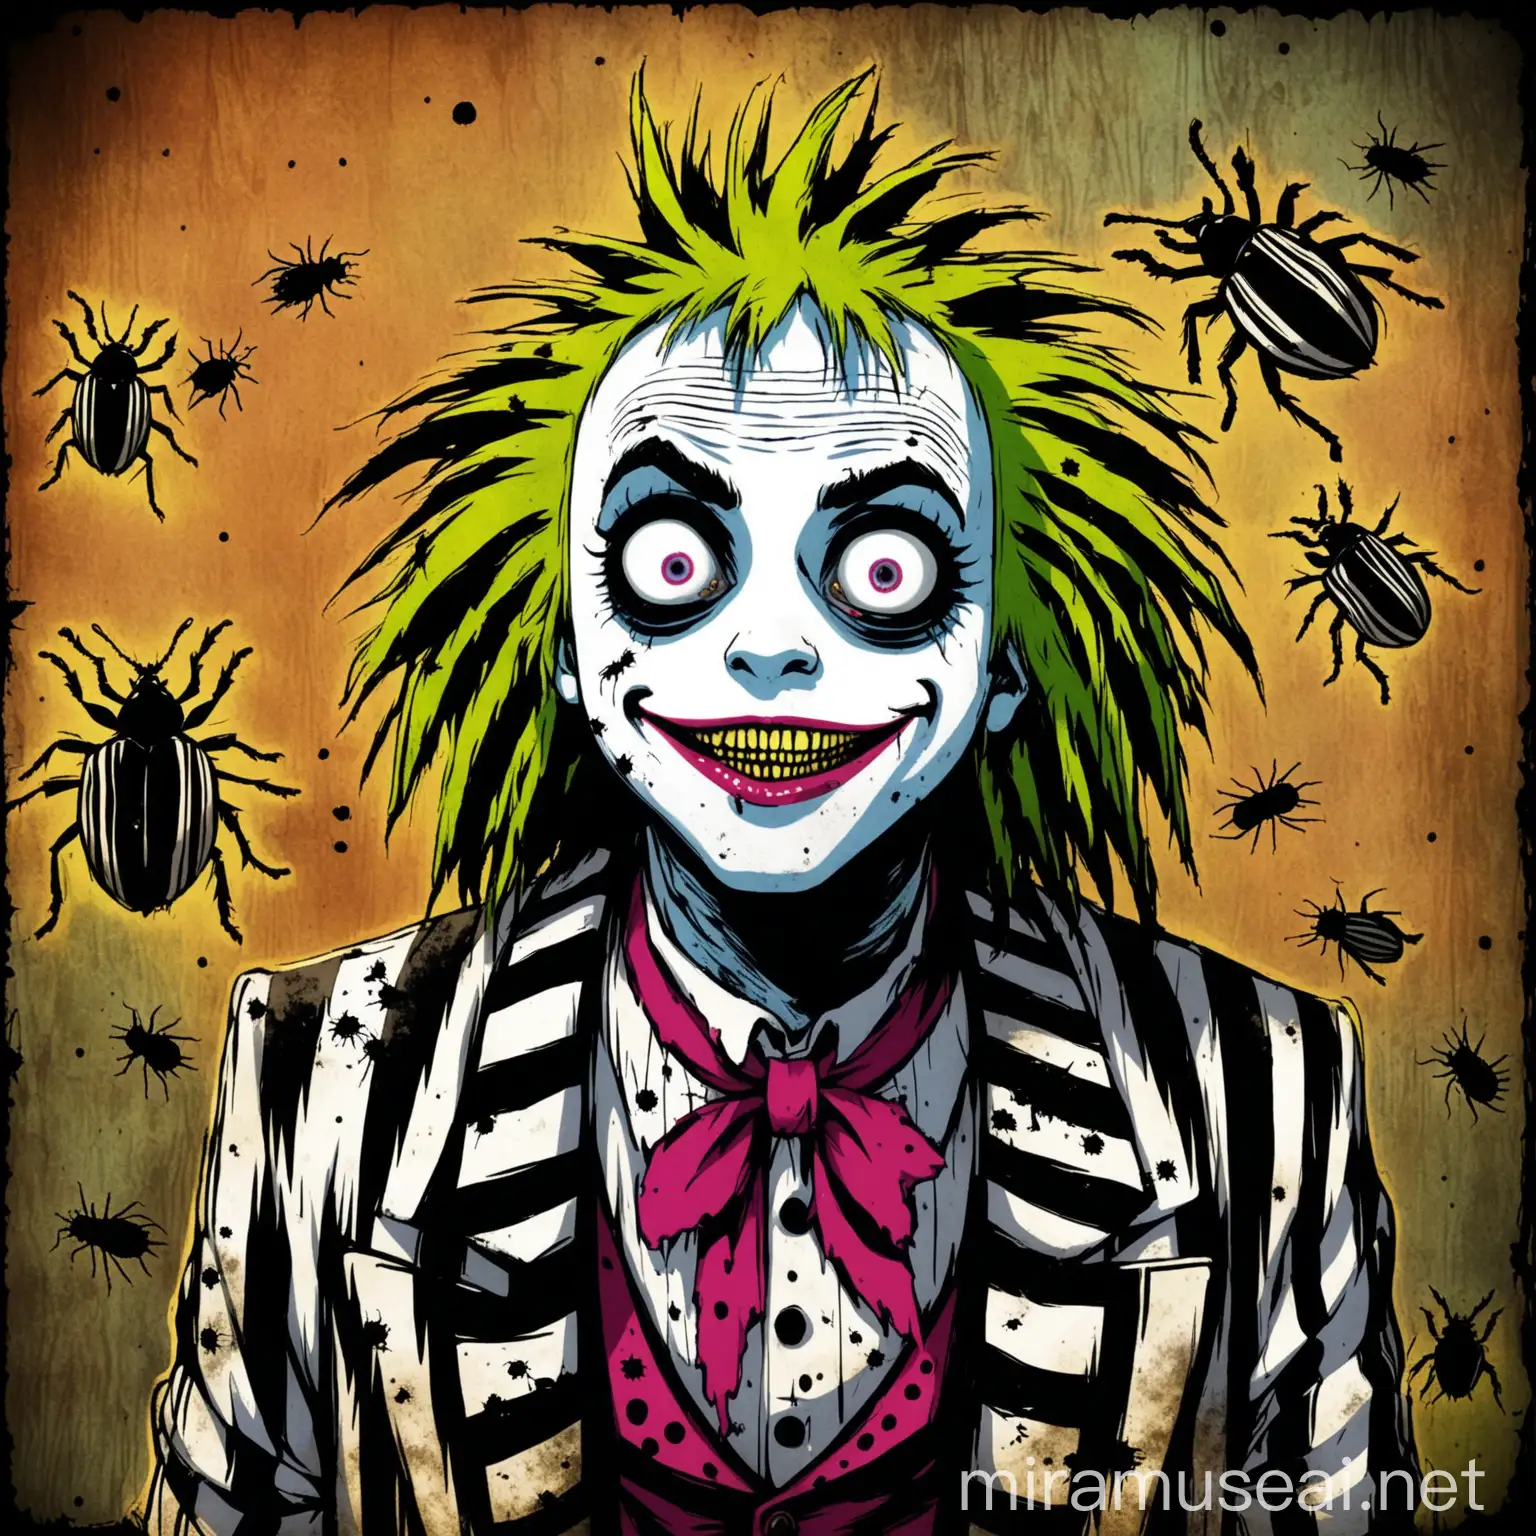 Vibrant Young Beetlejuice Surrounded by Grungy Bugs Perfect Avatar Pic